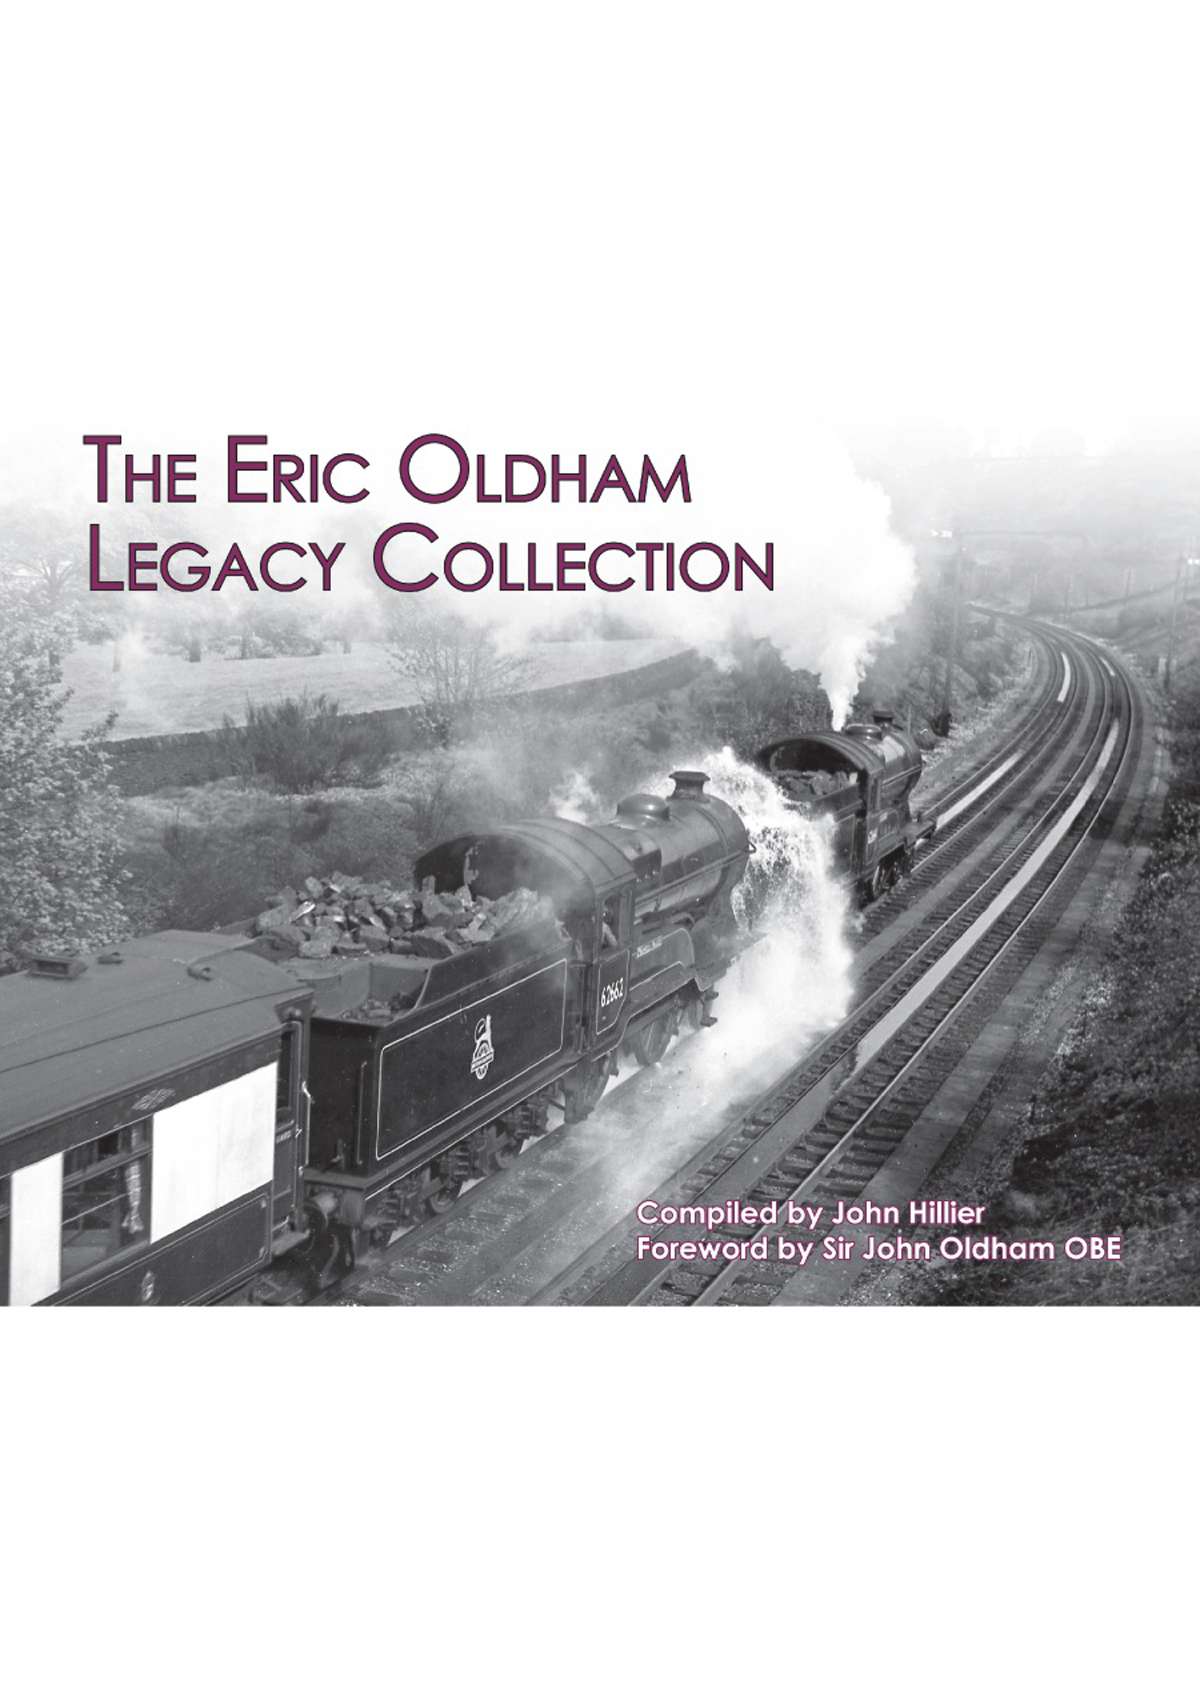 PRE-ORDER Book: The Eric Oldham Legacy Collection